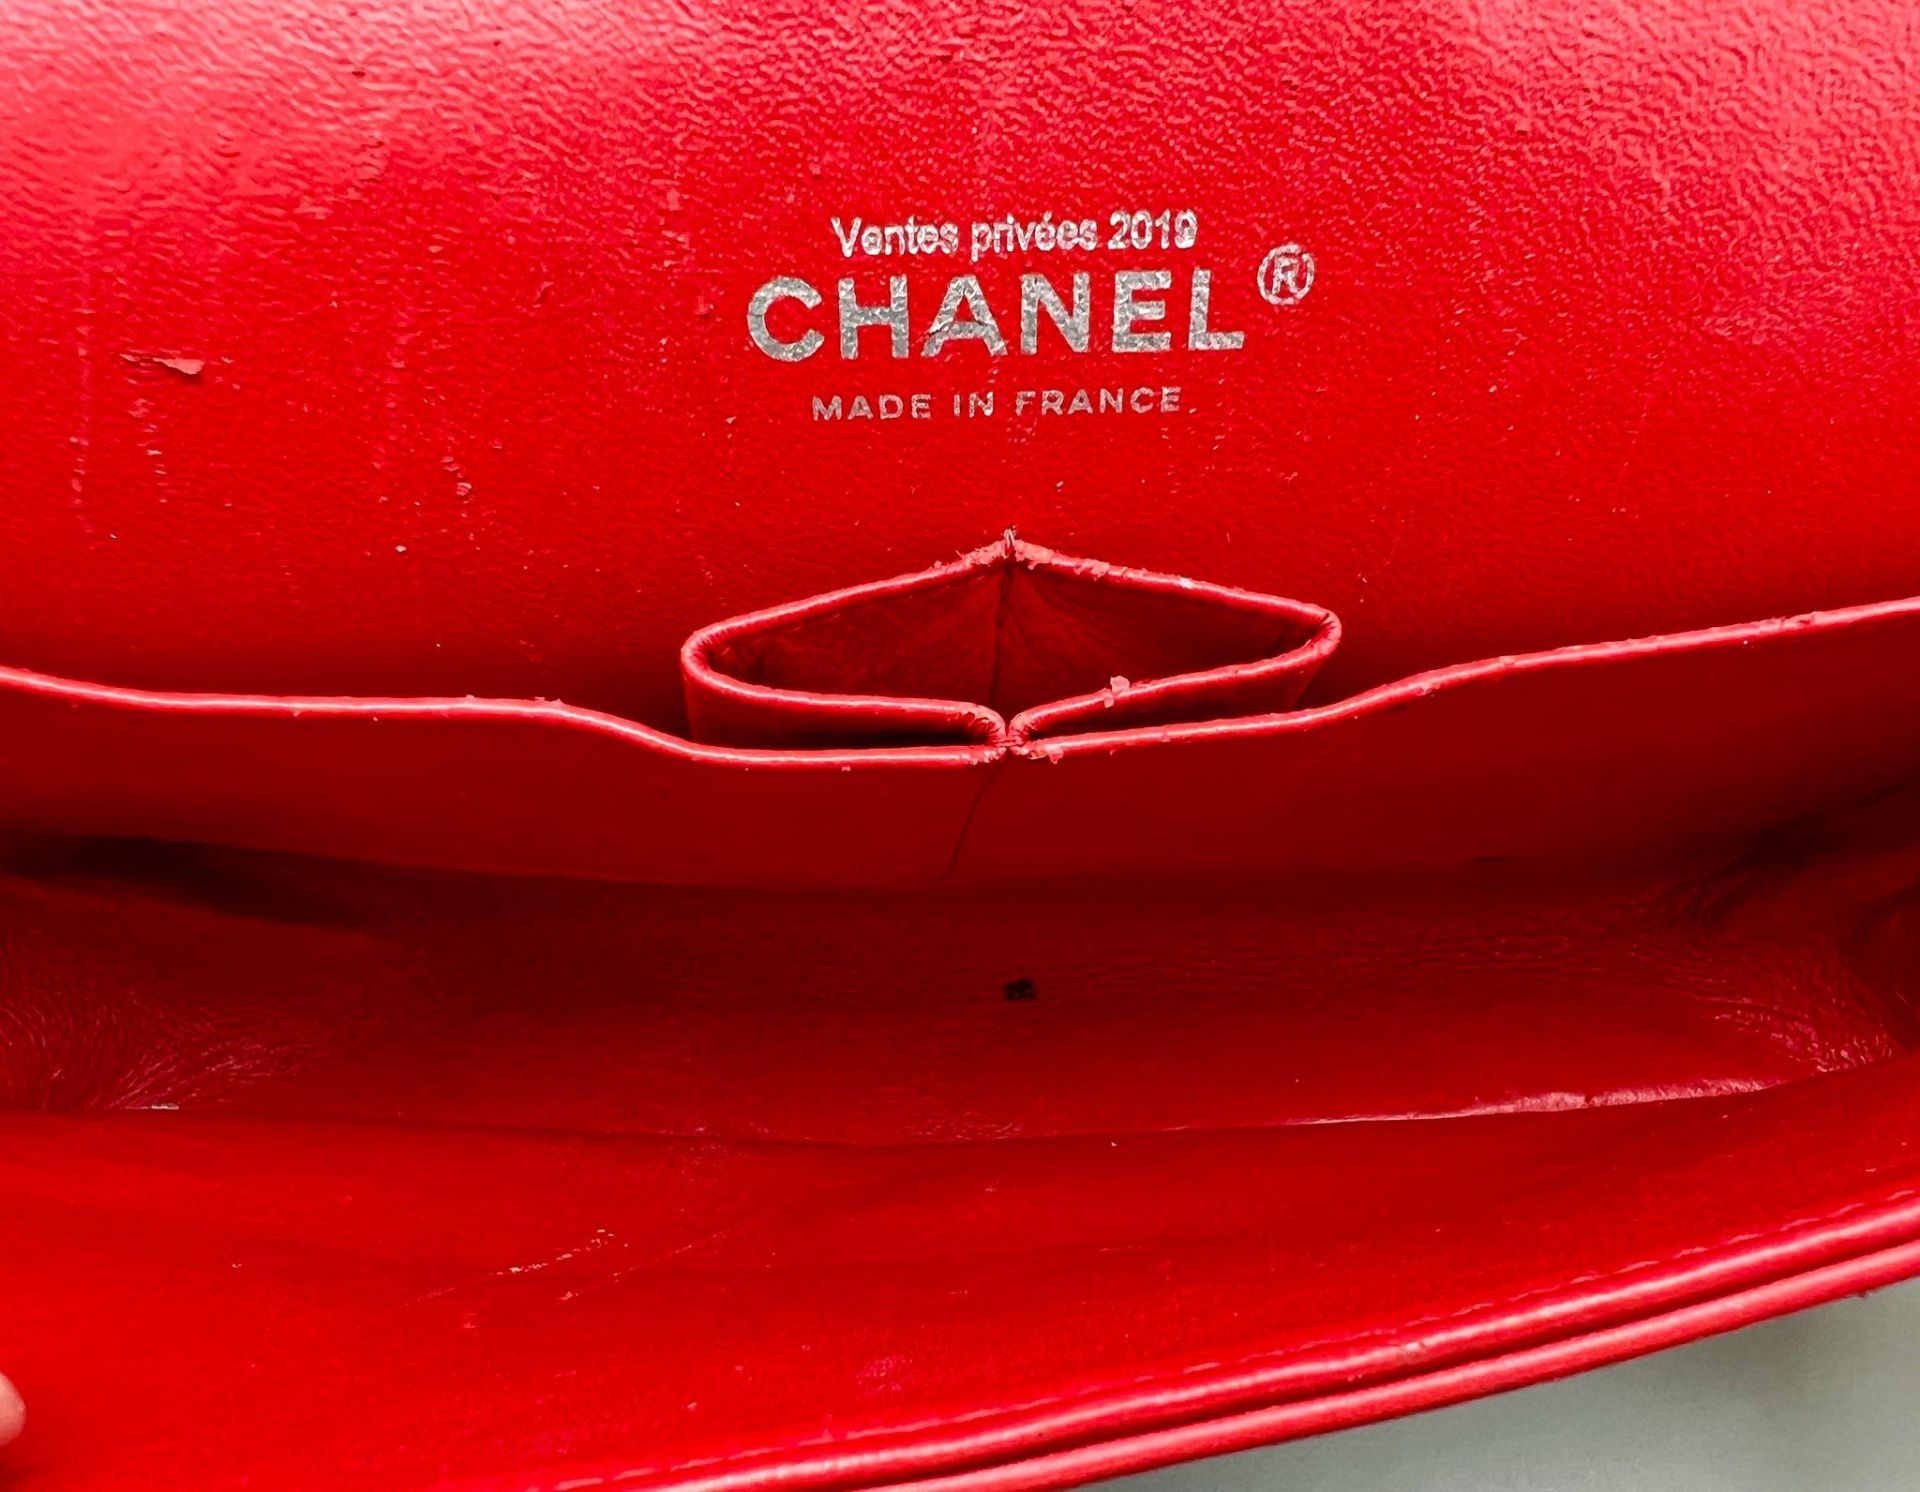 A Chanel Patent Leather Flap Handbag. Bright red patent leather quilted exterior. Classic Chanel - Bild 6 aus 7